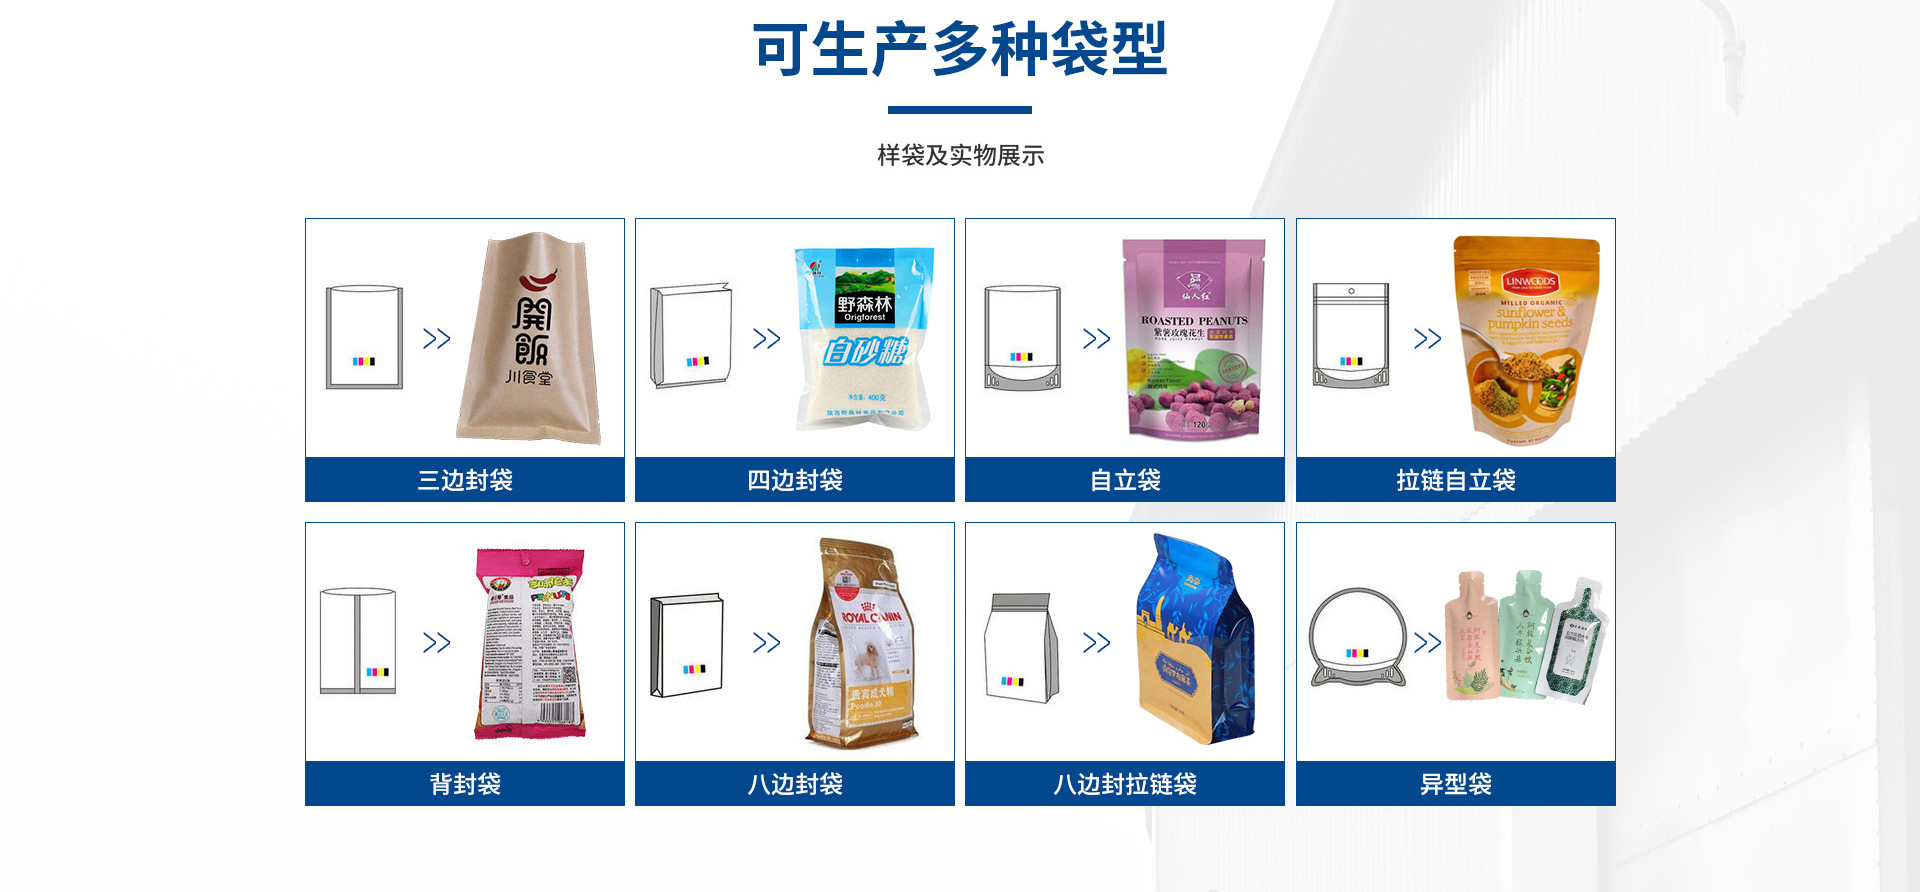 Fully automatic electronic scale measuring large bag coconut ball packaging machine Candy sesame ball particle feeding bag packaging machine